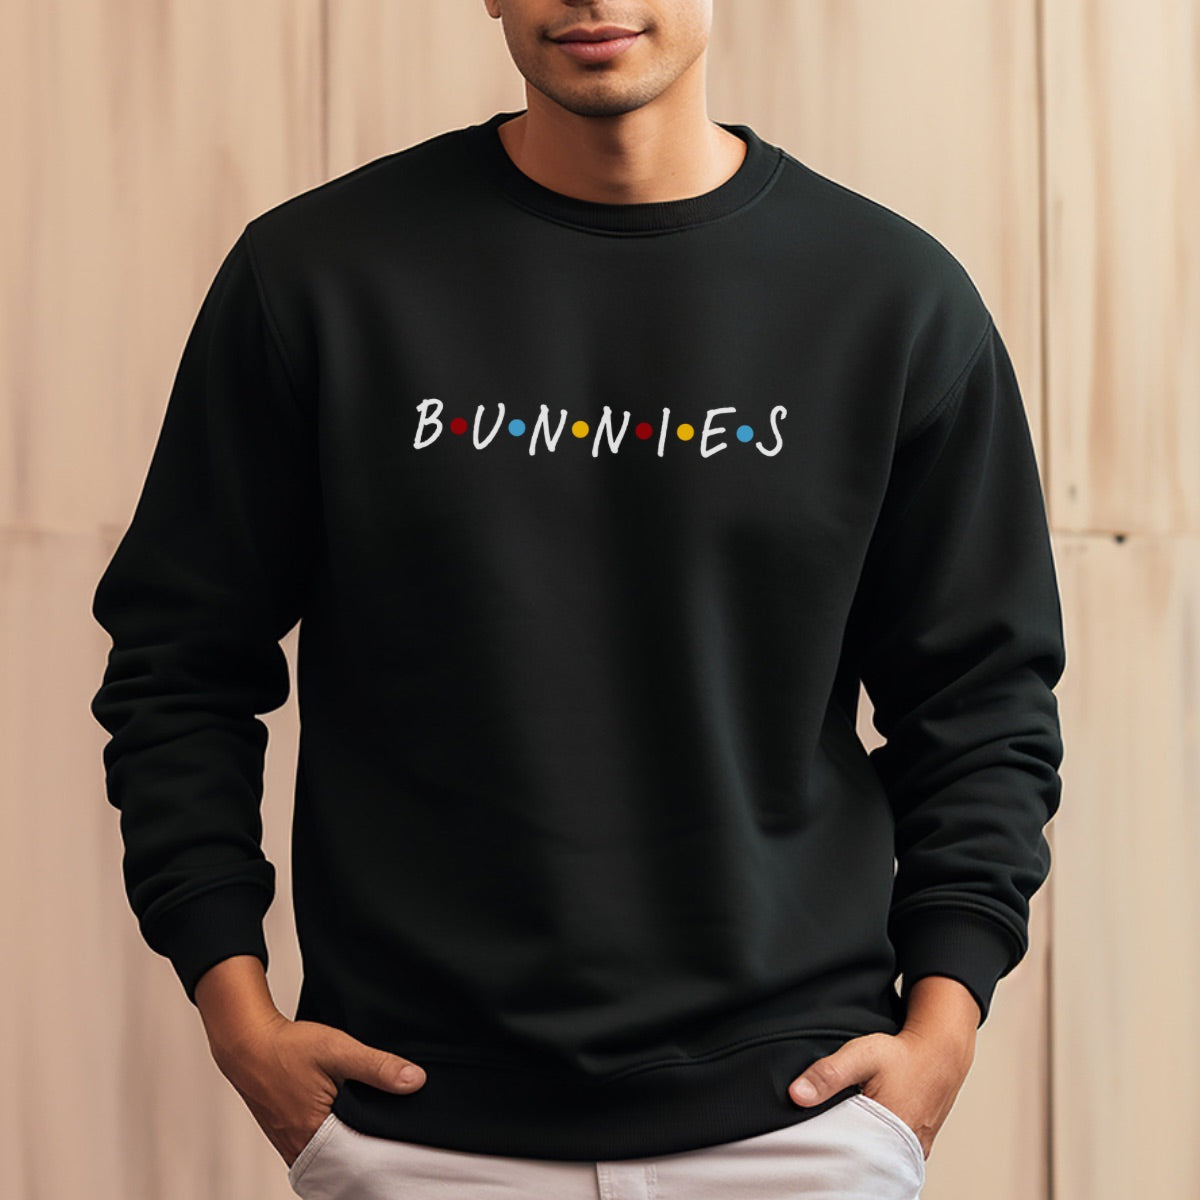 Man wearing a black sweatshirt with the text Bunnies on it.